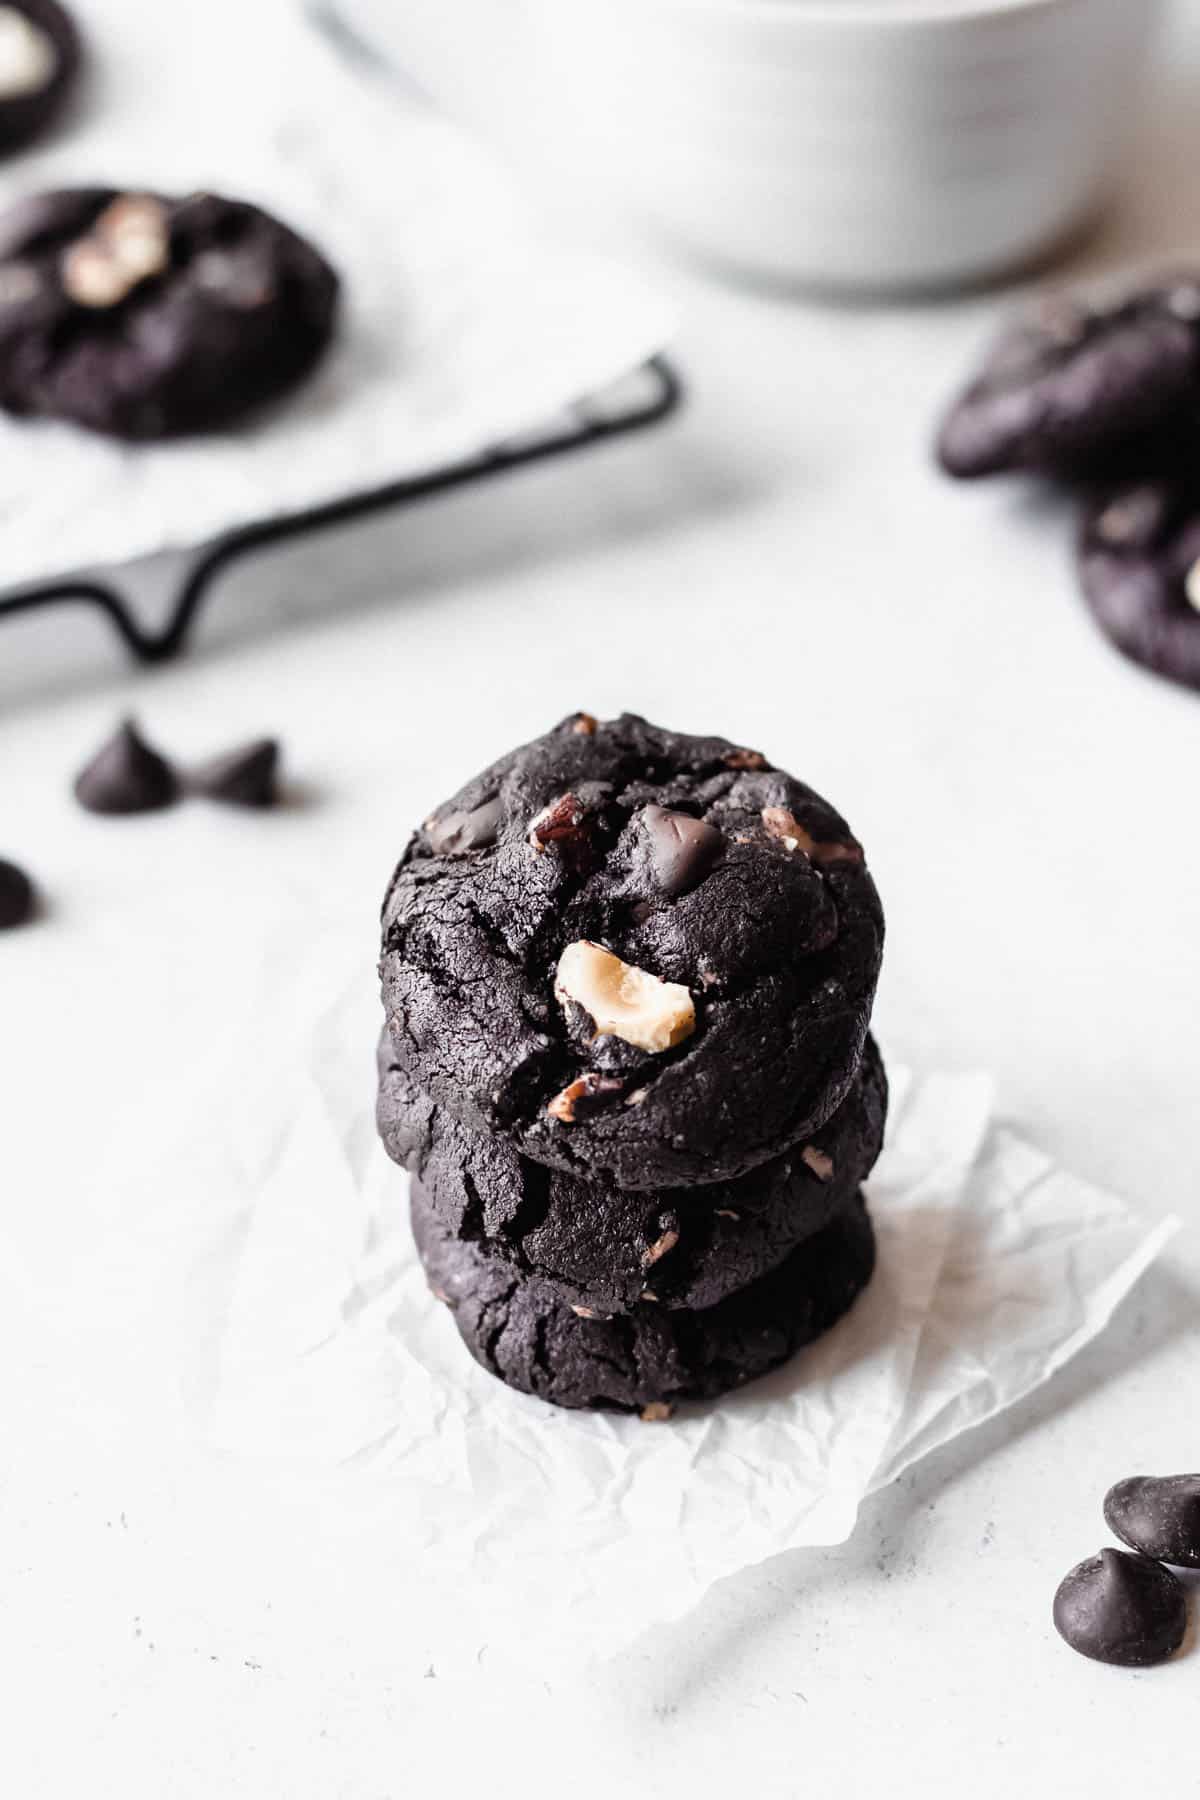 A stack of three dark chocolate hazelnut cookies on white paper with more cookies around them